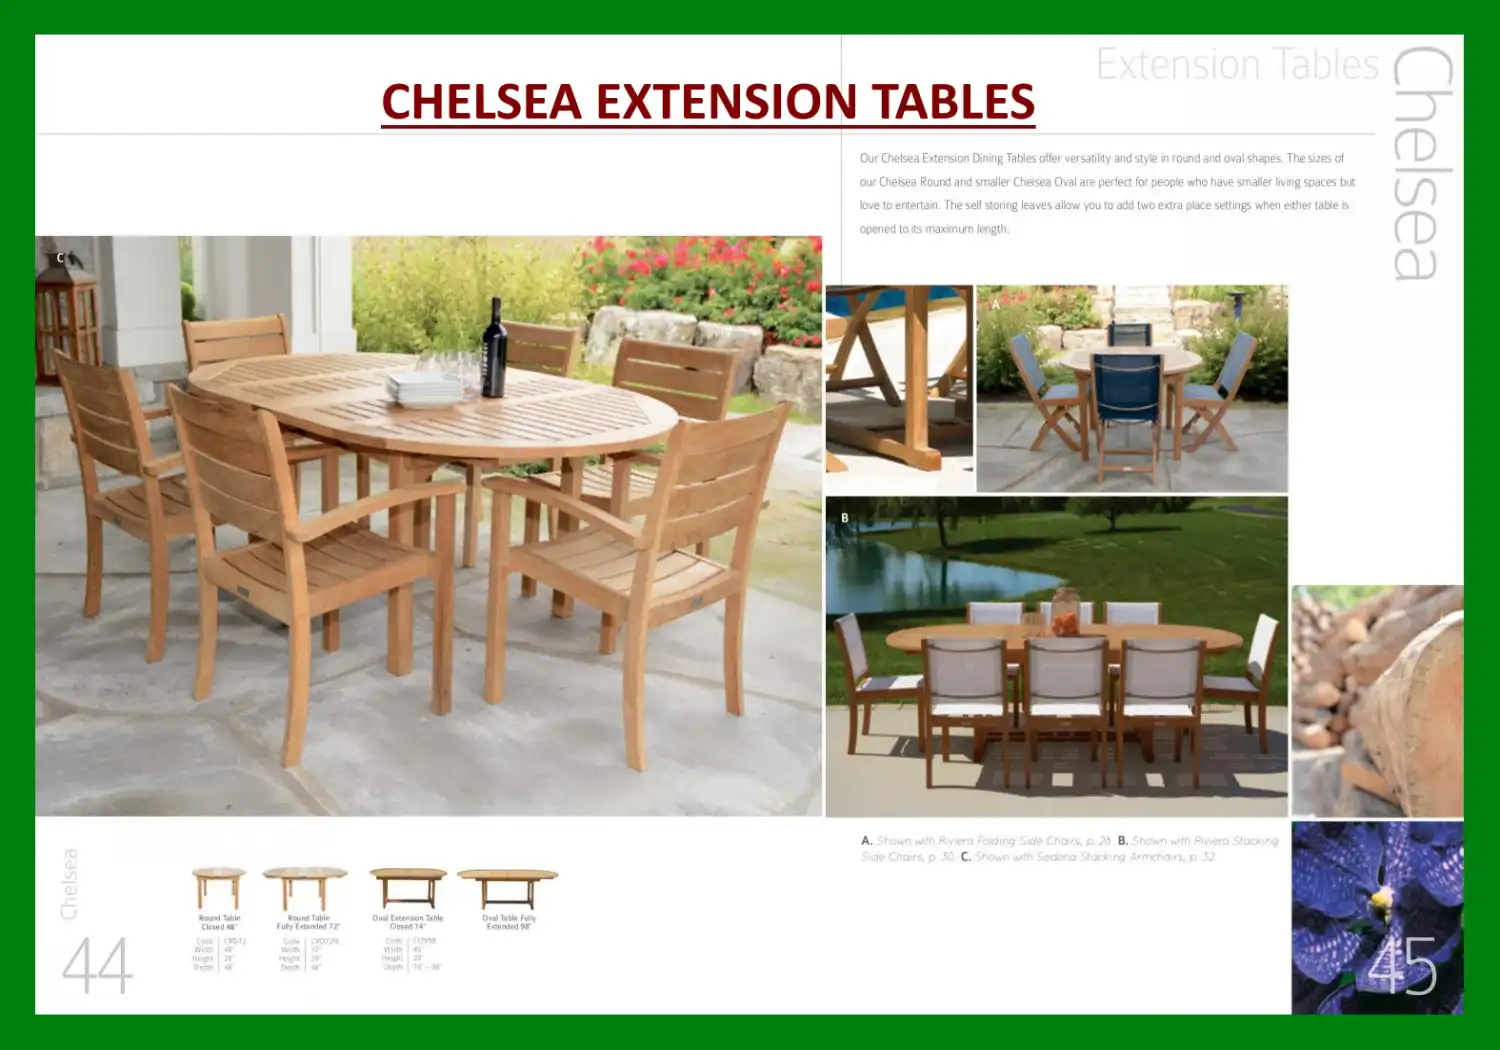 CHELSEA EXTENSION TABLES